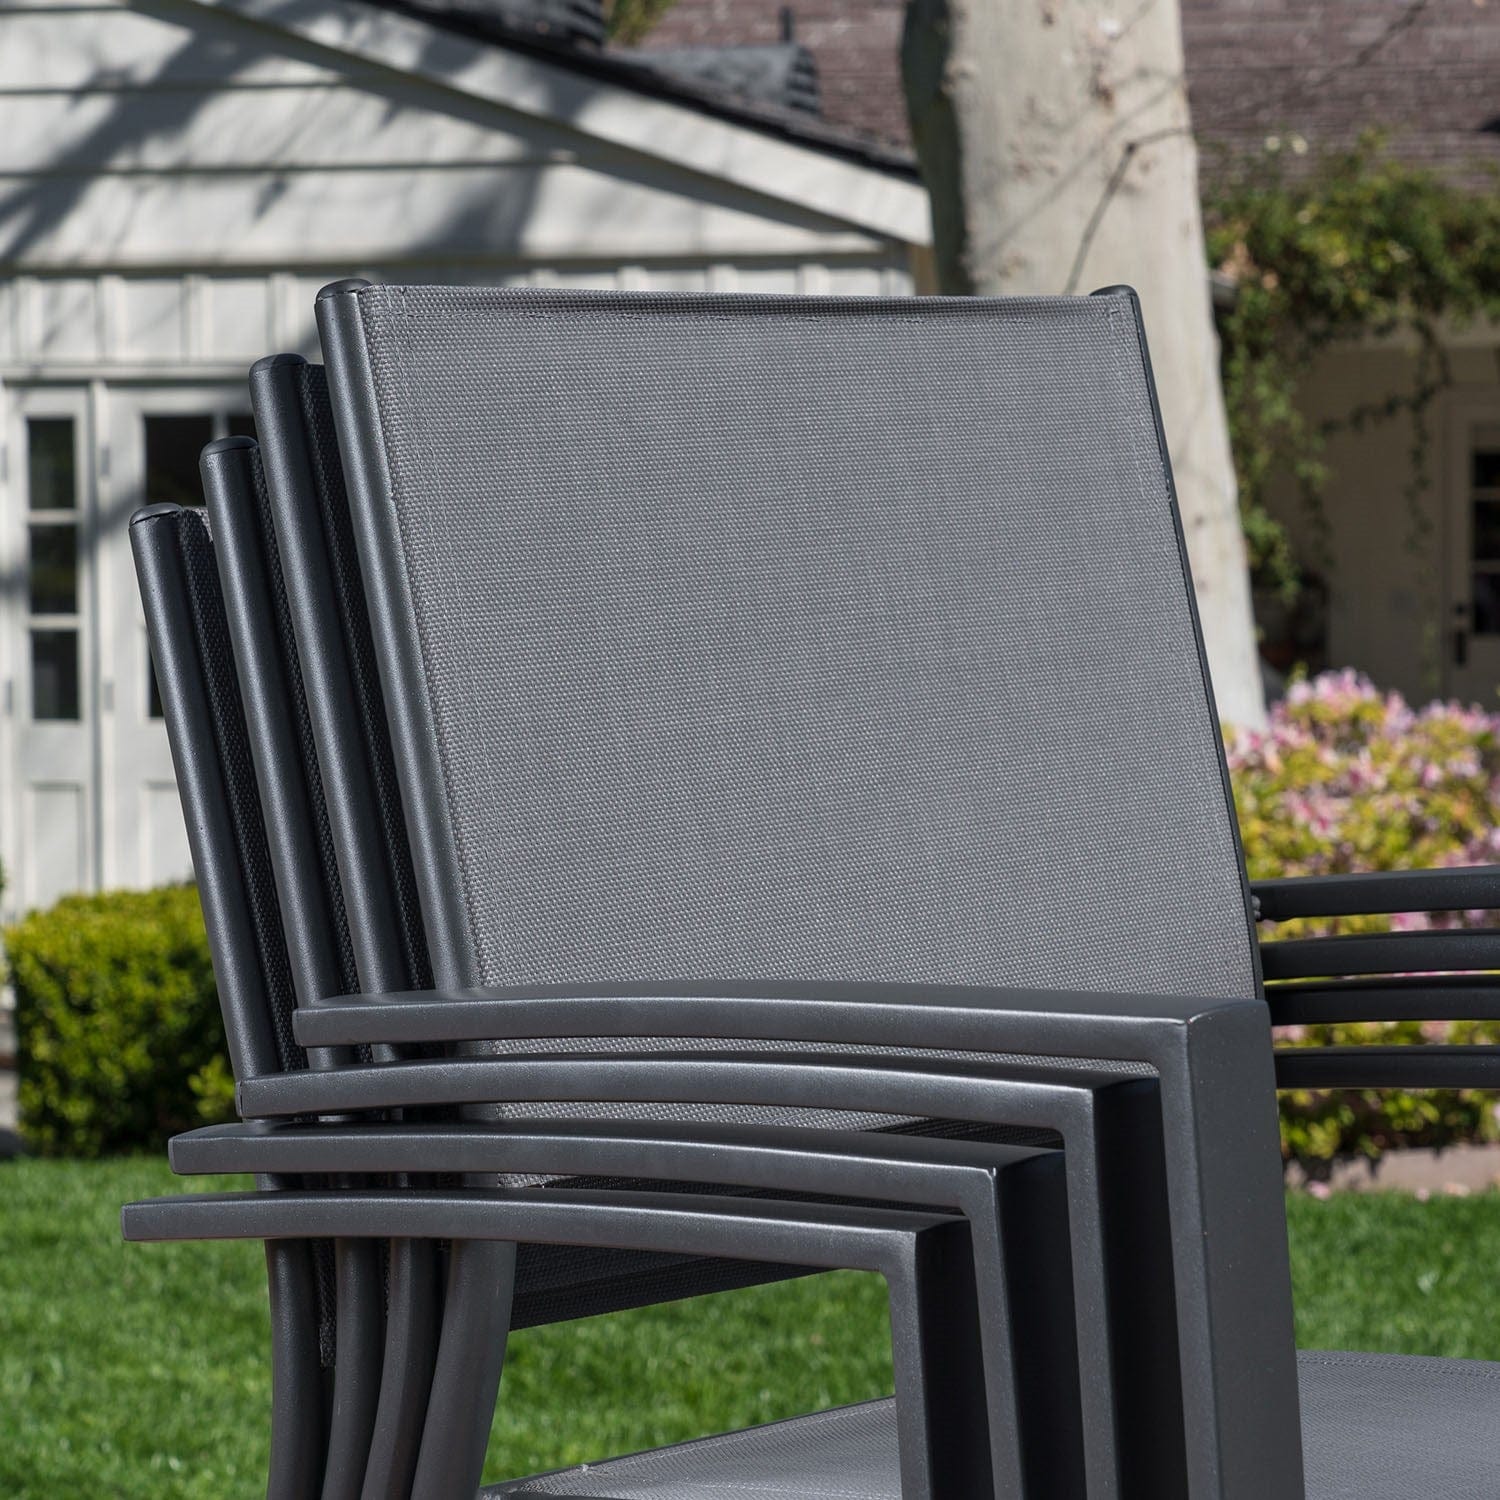 Hanover Outdoor Dining Set Hanover - Naples 7pc Dining Set: 6 Sling Back Chairs, 1 Aluminum Table